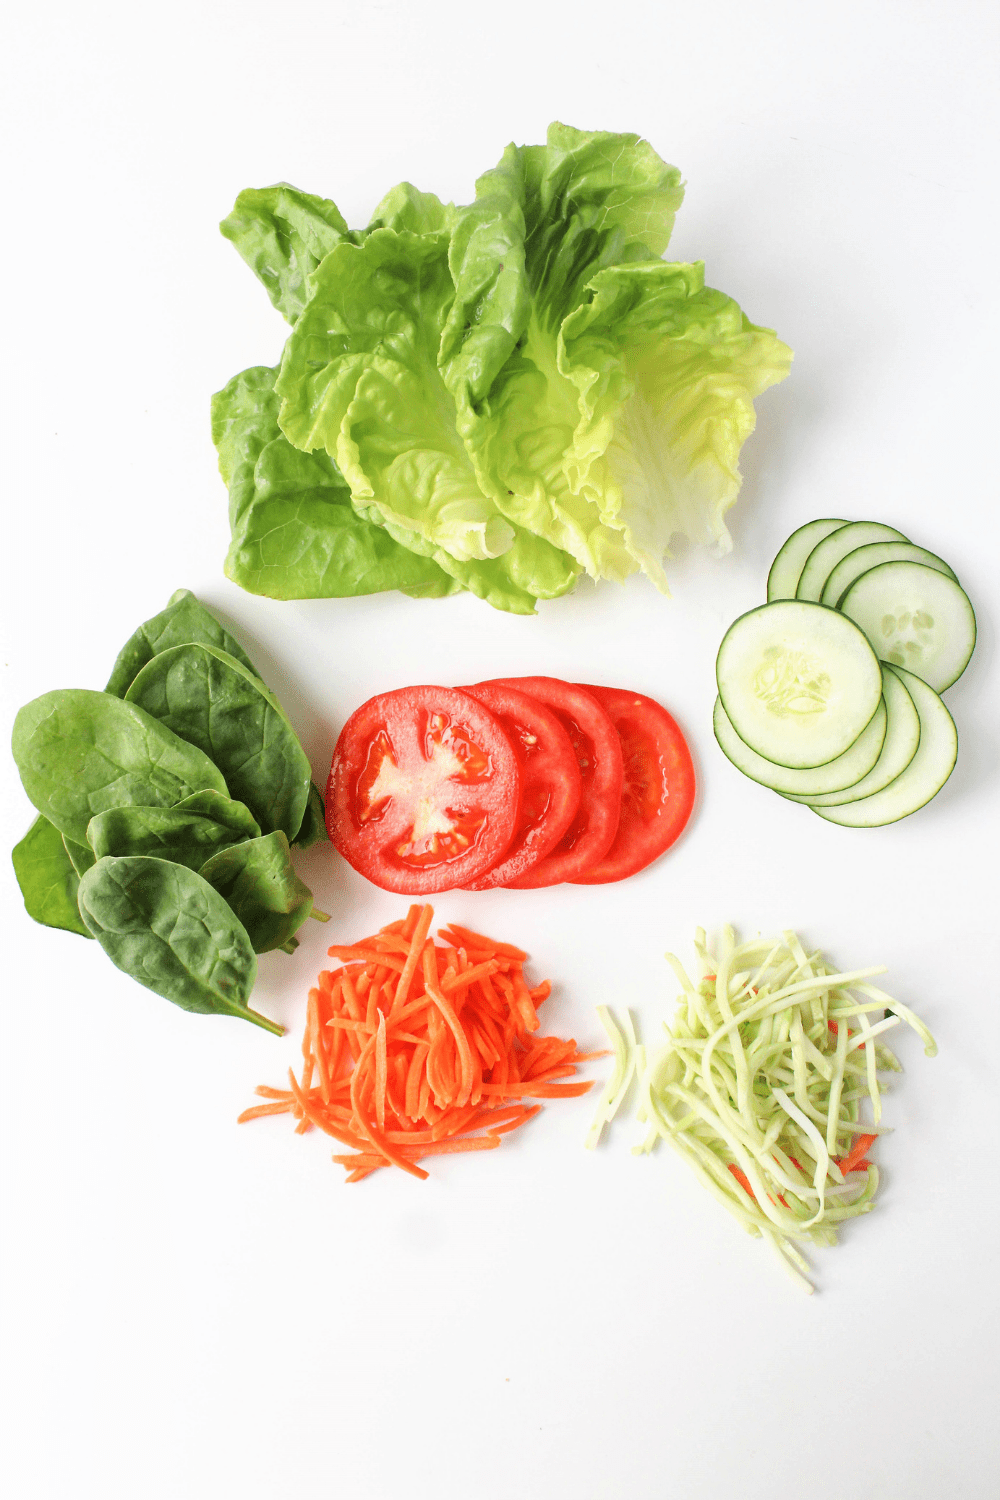 lettuce, tomatoes, and cucumbers